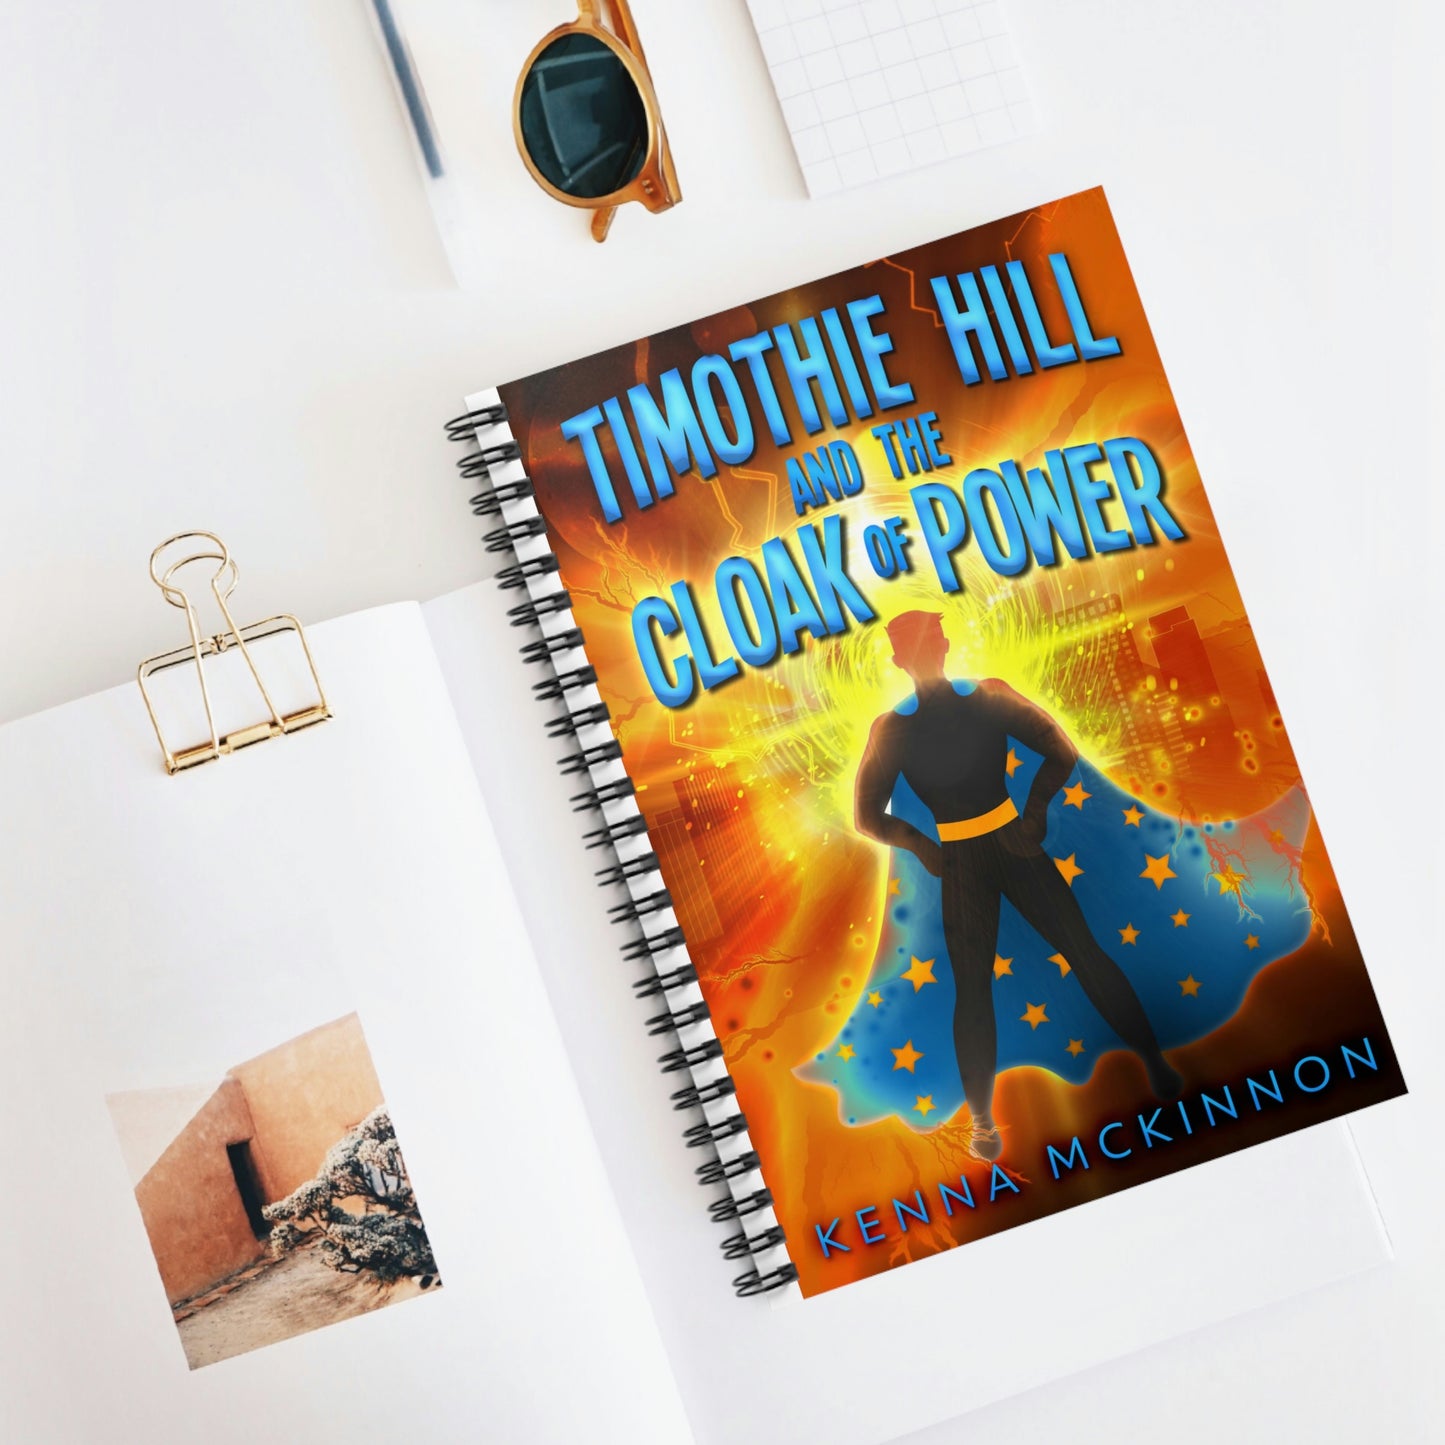 Timothie Hill and the Cloak of Power - Spiral Notebook